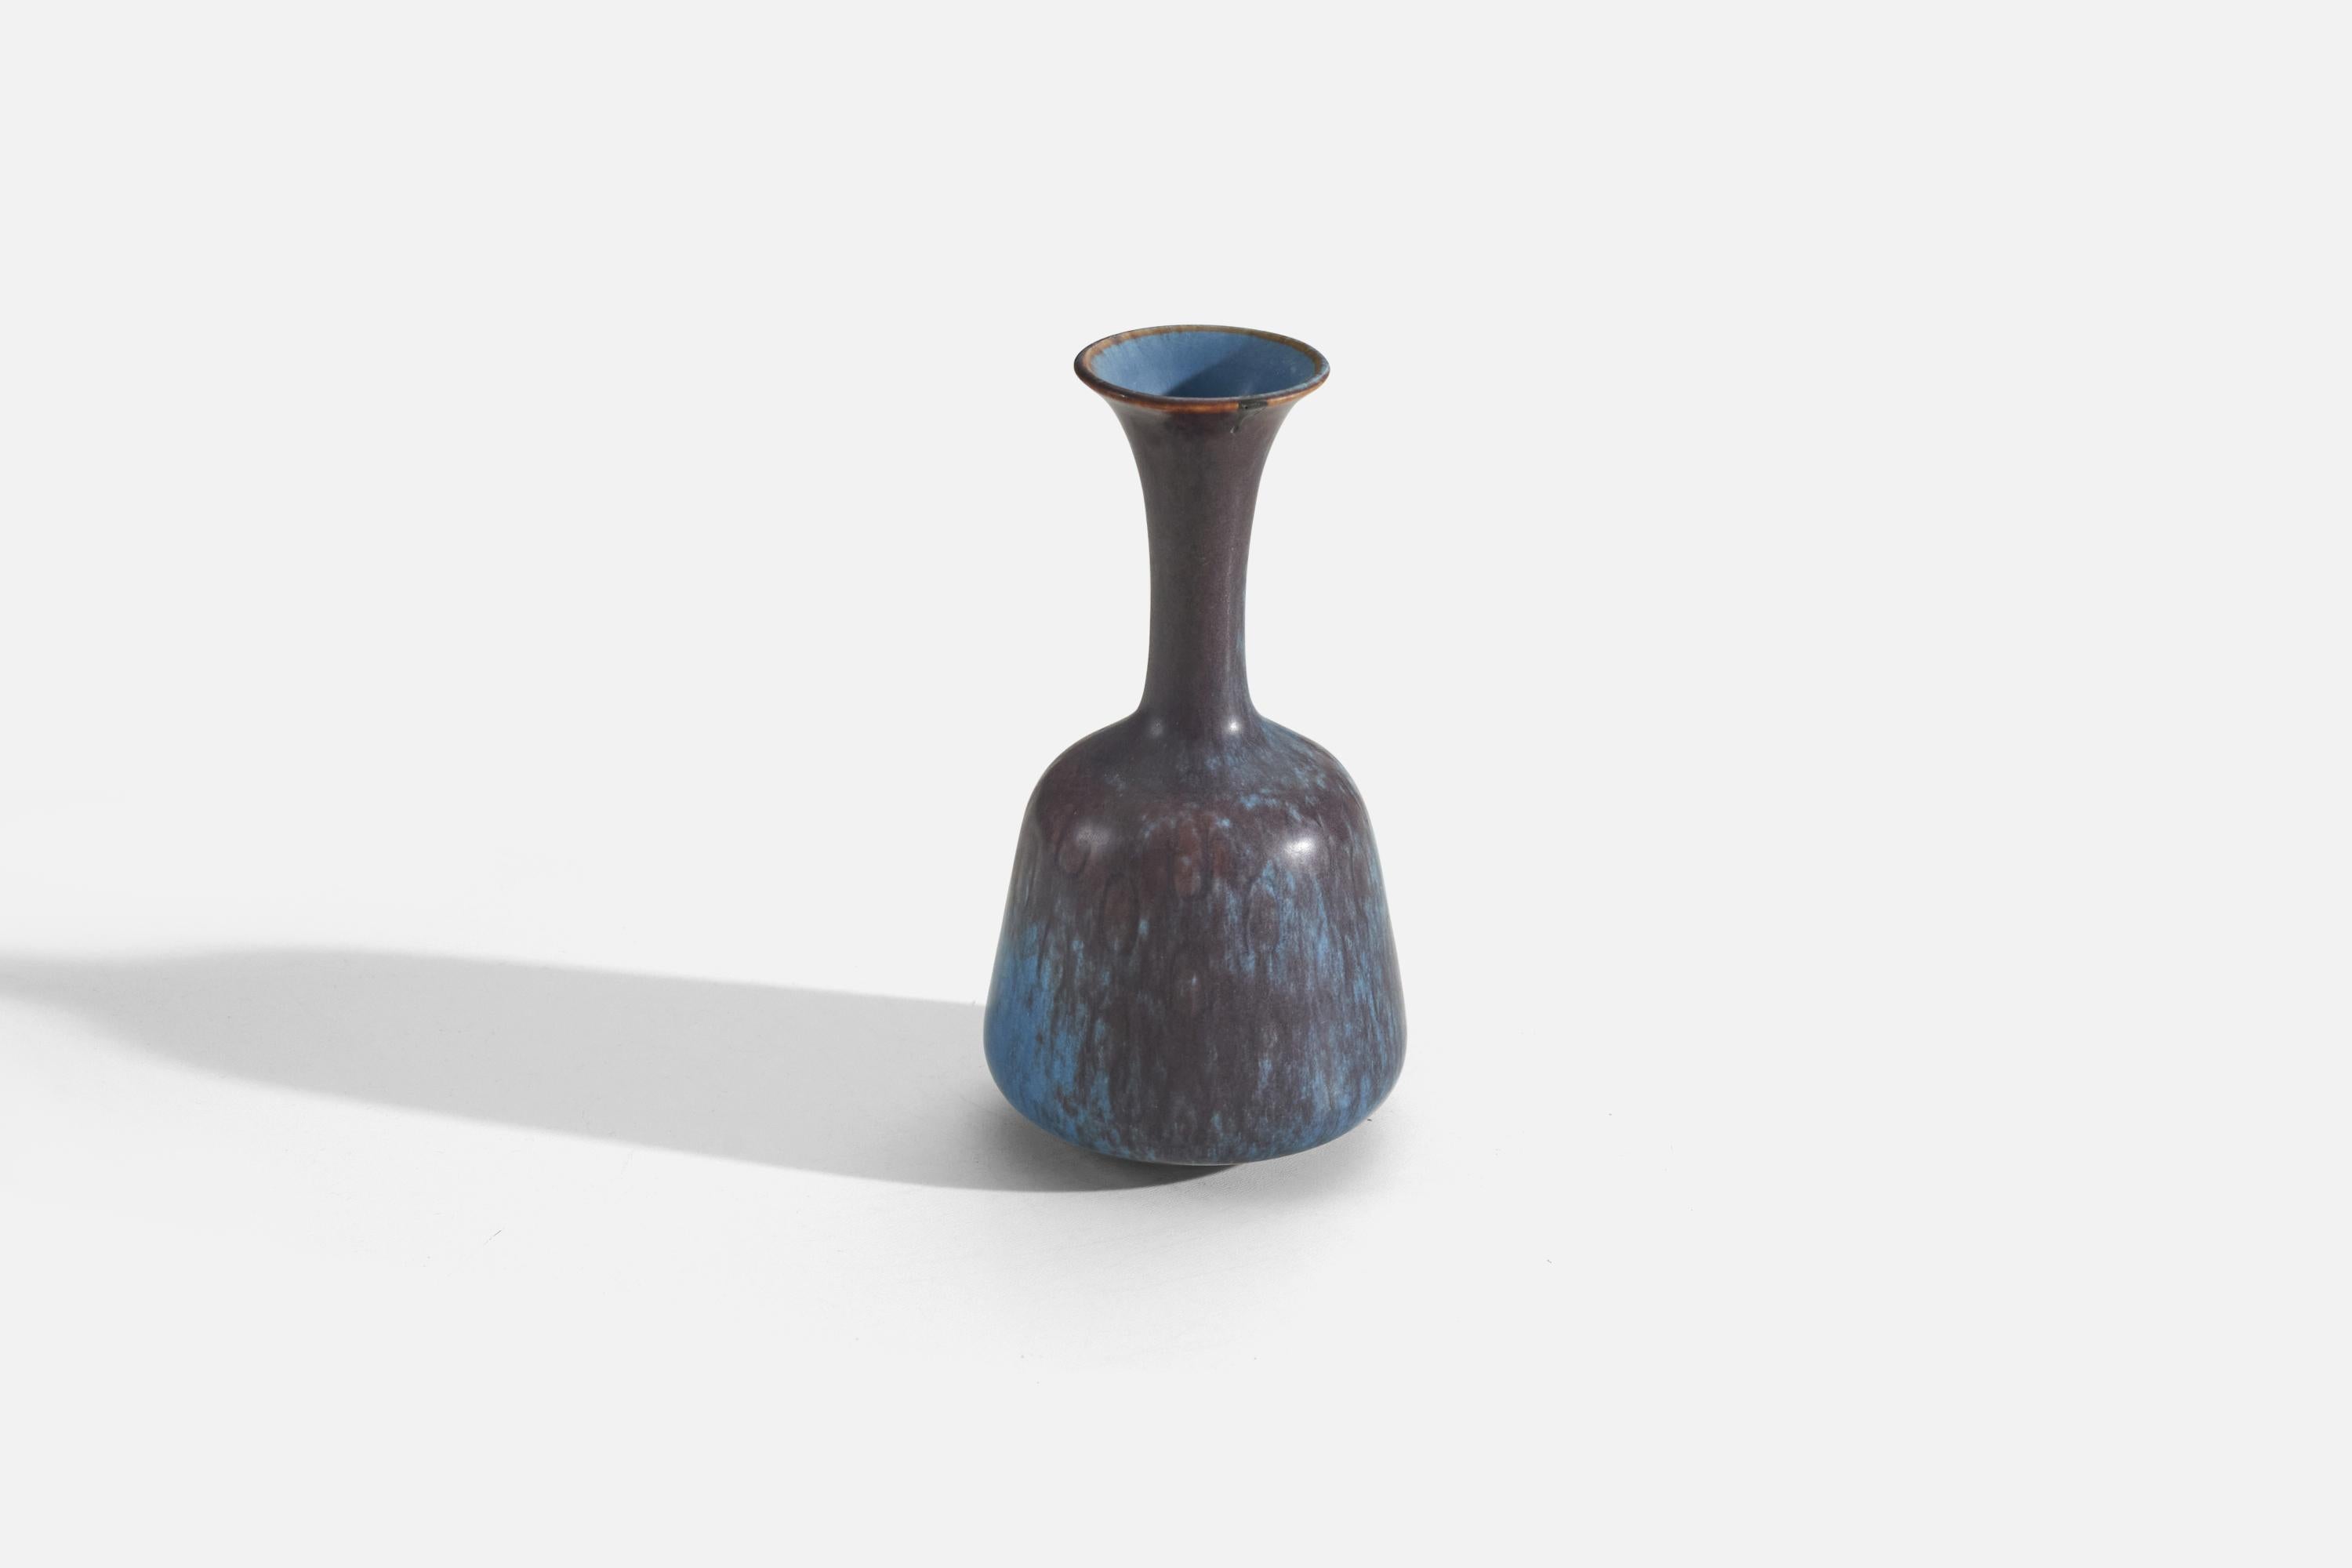 Gunnar Nylund, Vase, Blue and Brown-Glazed Stoneware, Rörstand, Sweden, 1950s In Good Condition For Sale In High Point, NC